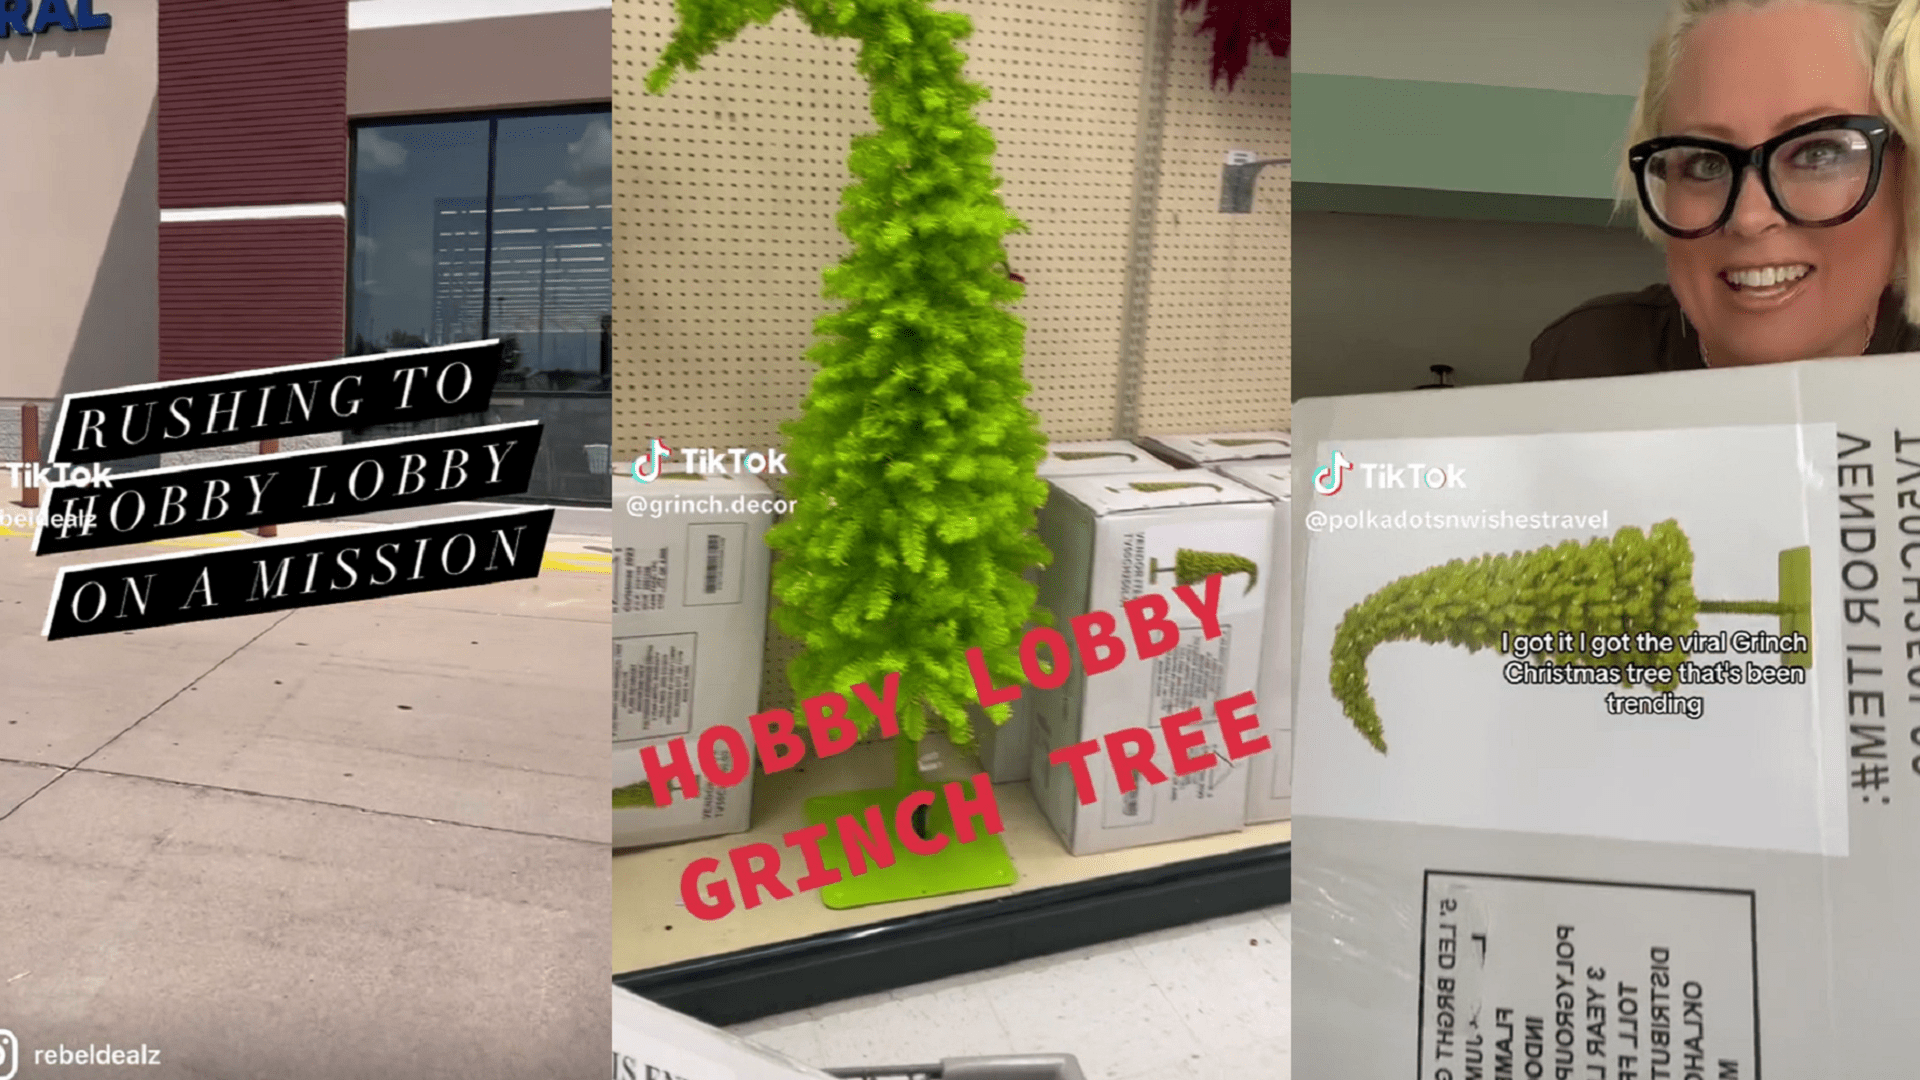 Hobby Lobby Grinch Christmas Trees are Selling Now Resell Calendar